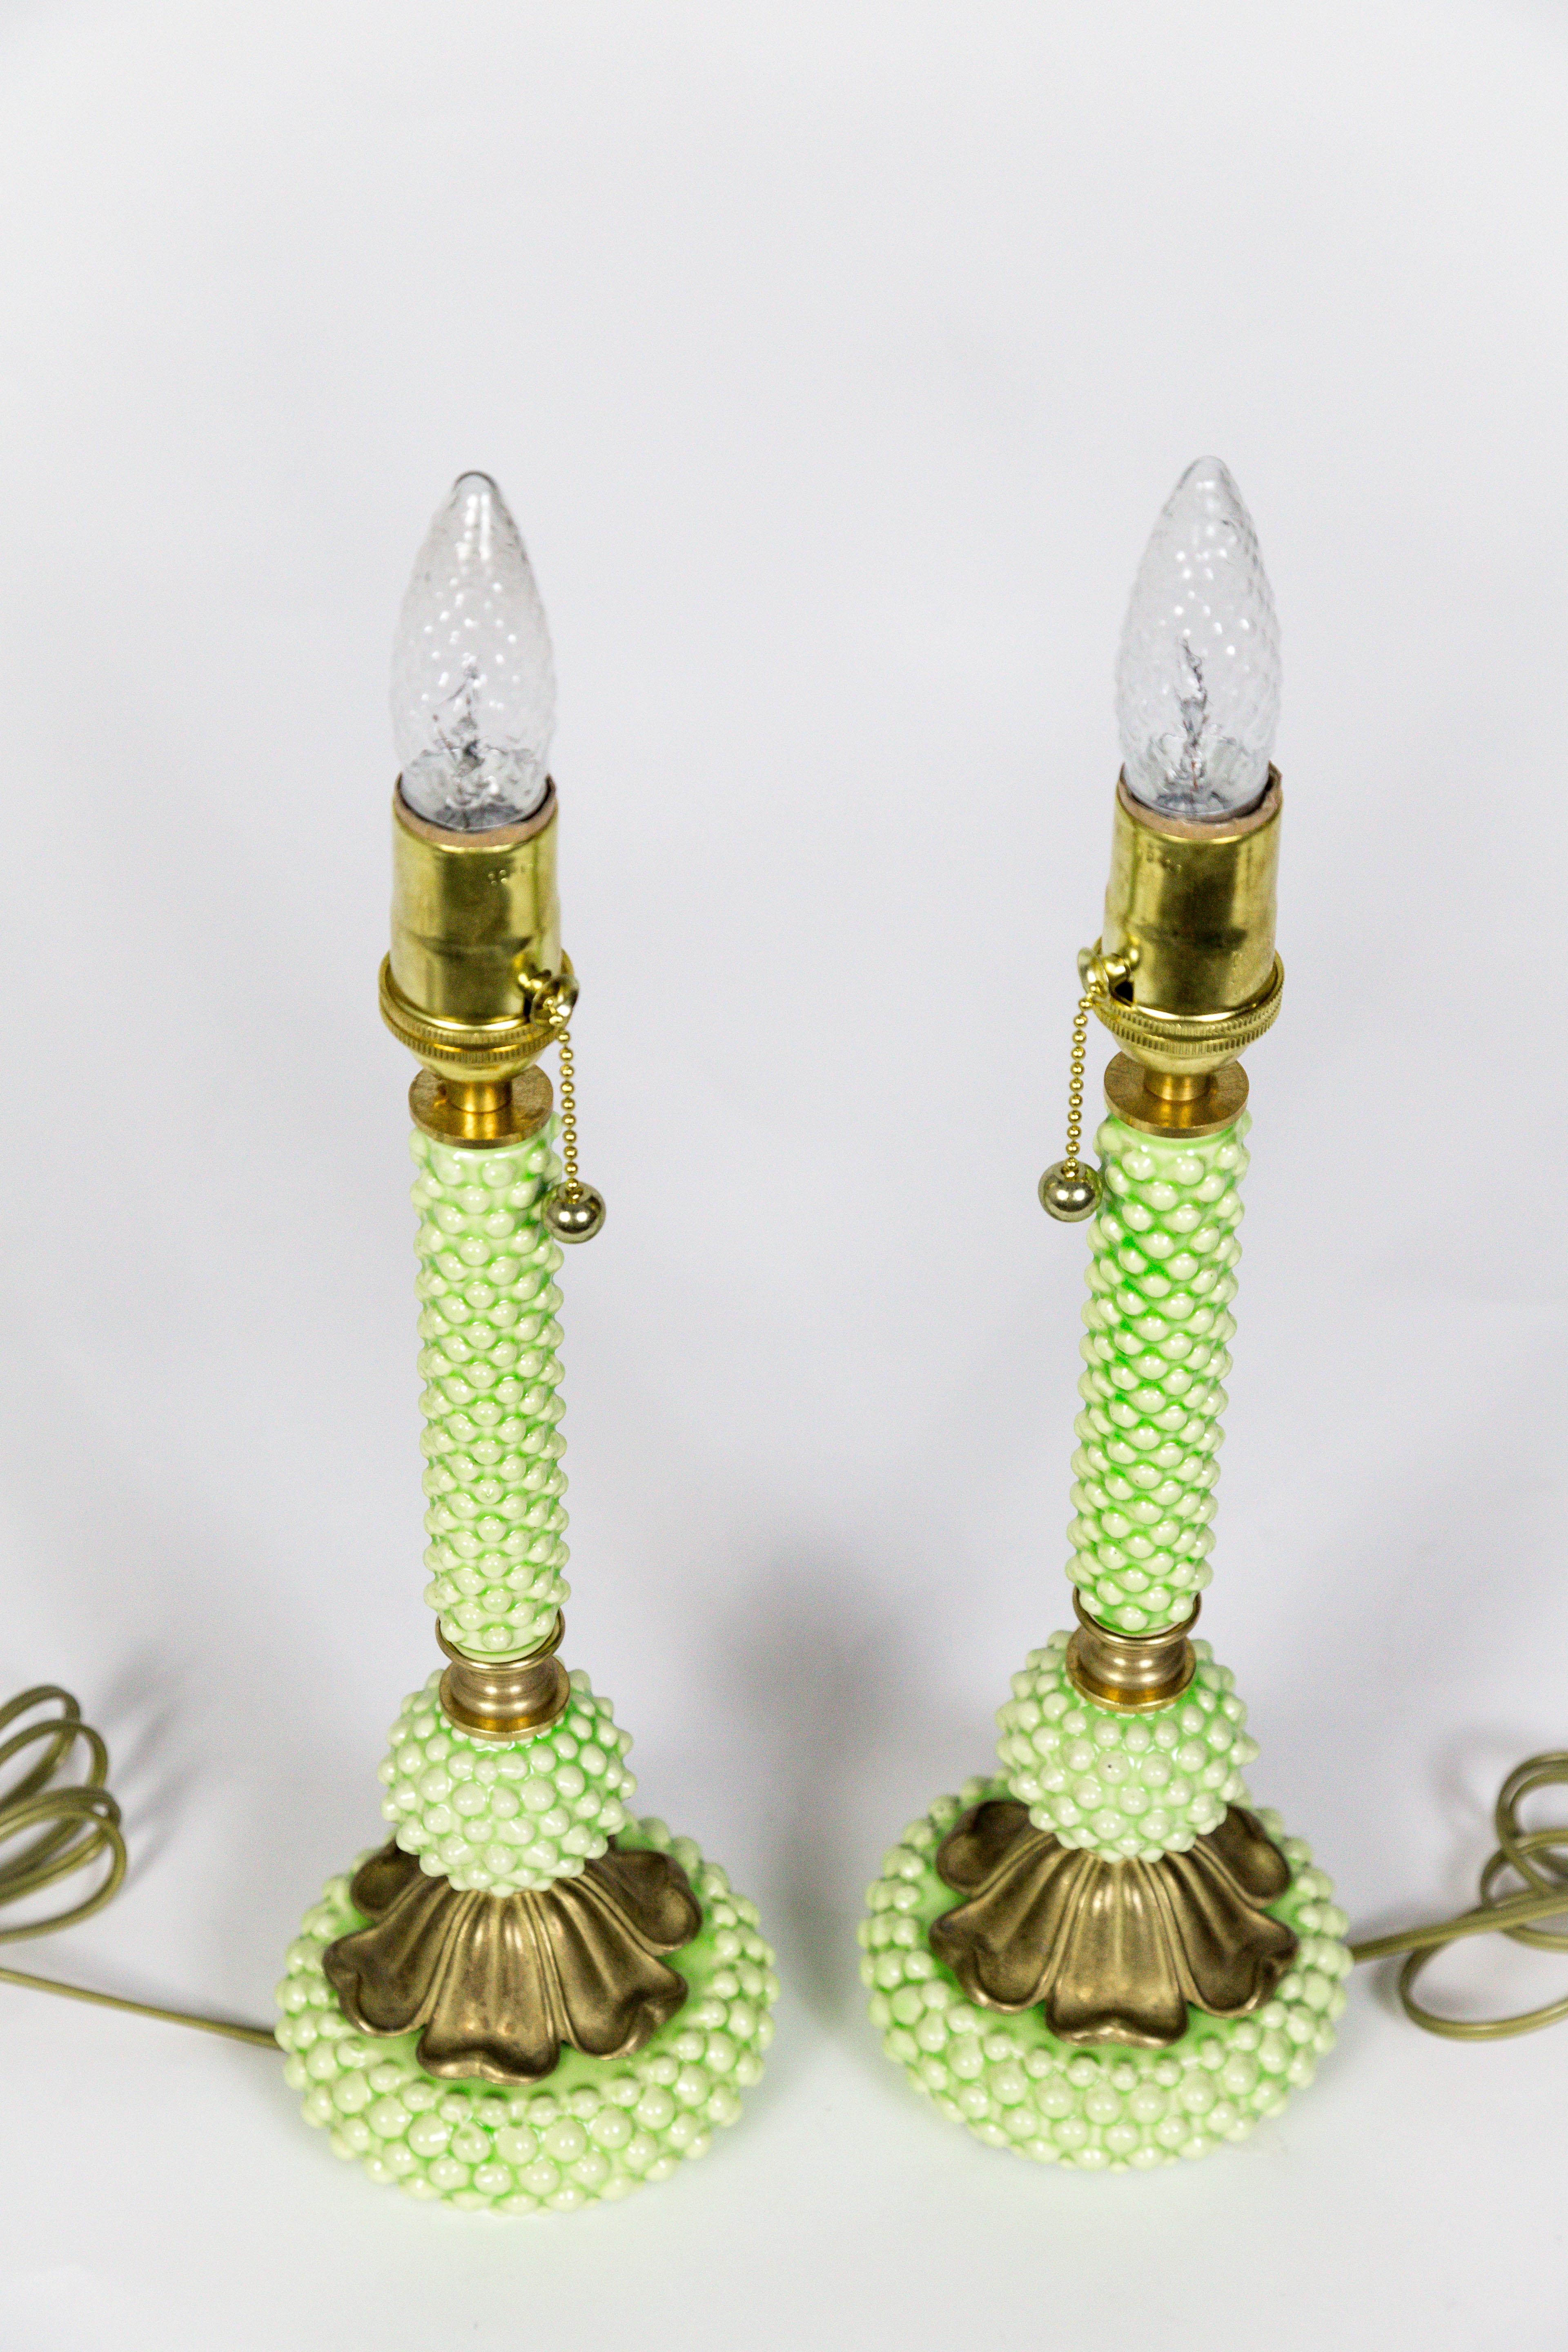 Modern Midcentury Green Hobnail Ceramic and Brass Lamps 'Pair'